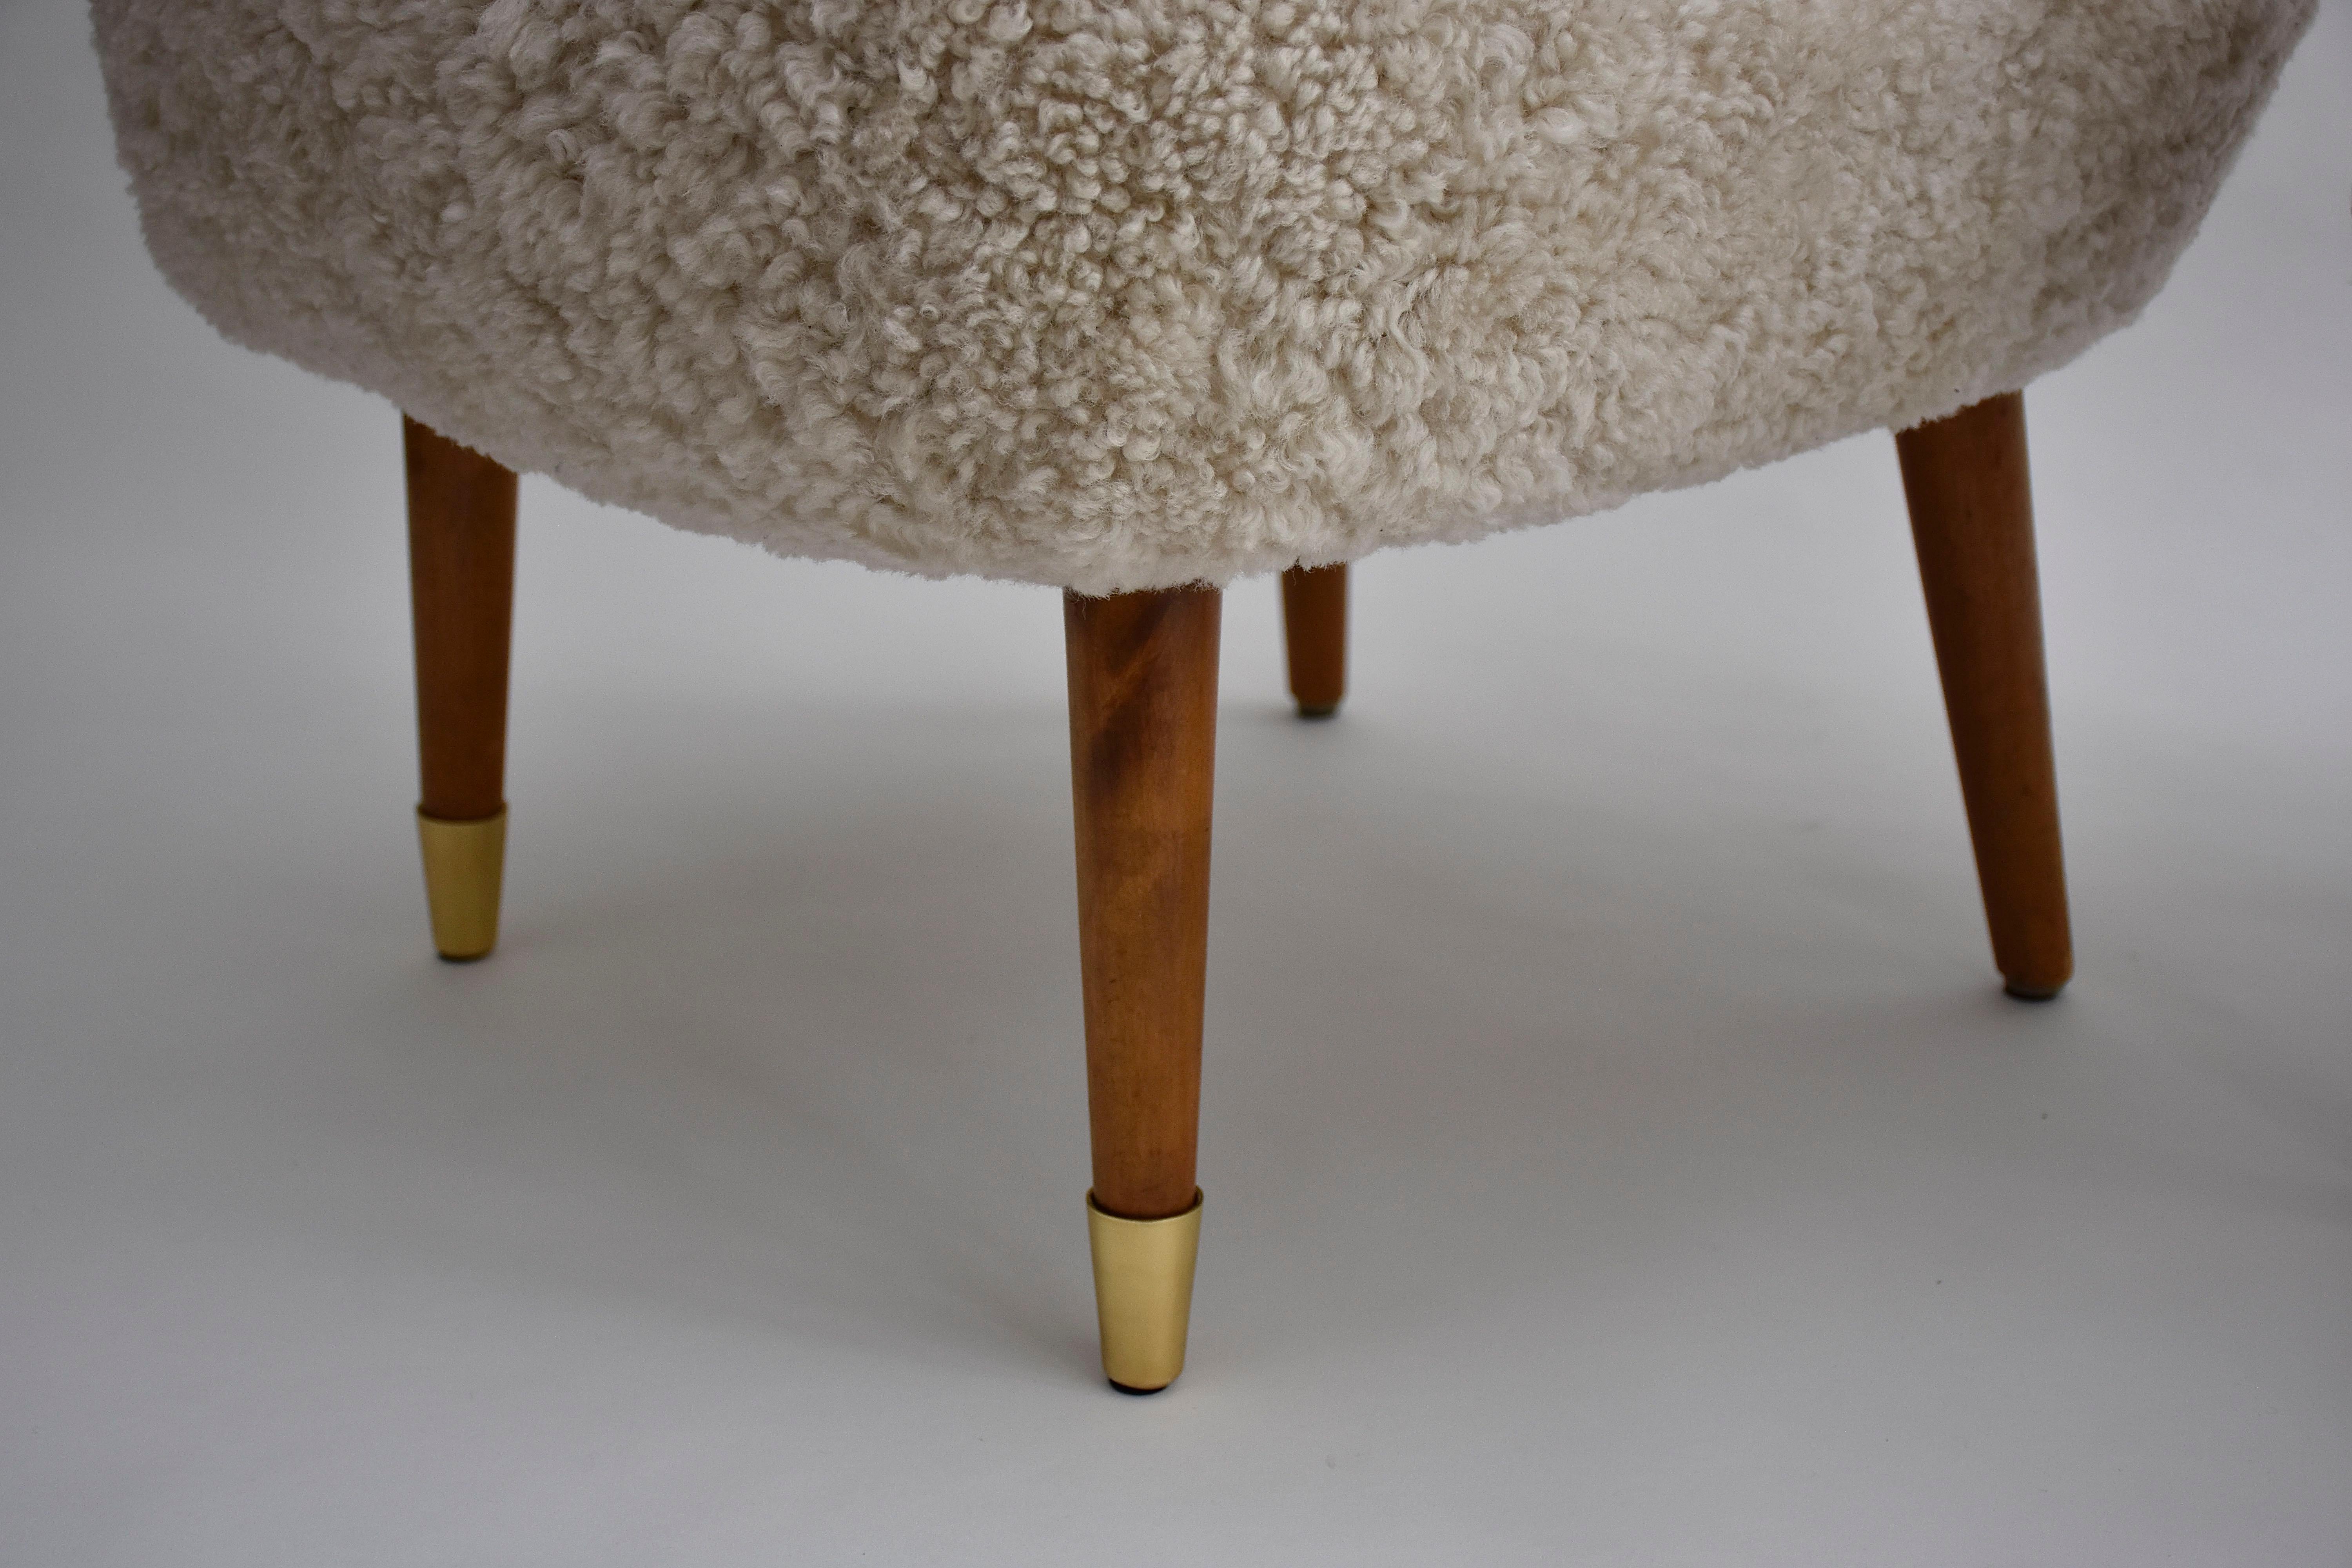 
A stunning pair of Scandinavian design cocktail or lounge chairs/ fauteuils.
The chairs have a unique look and elegant shape.
Stylish beech legs and beautiful brass details on the front legs.
New soft sheepskin upholstery and comfortable